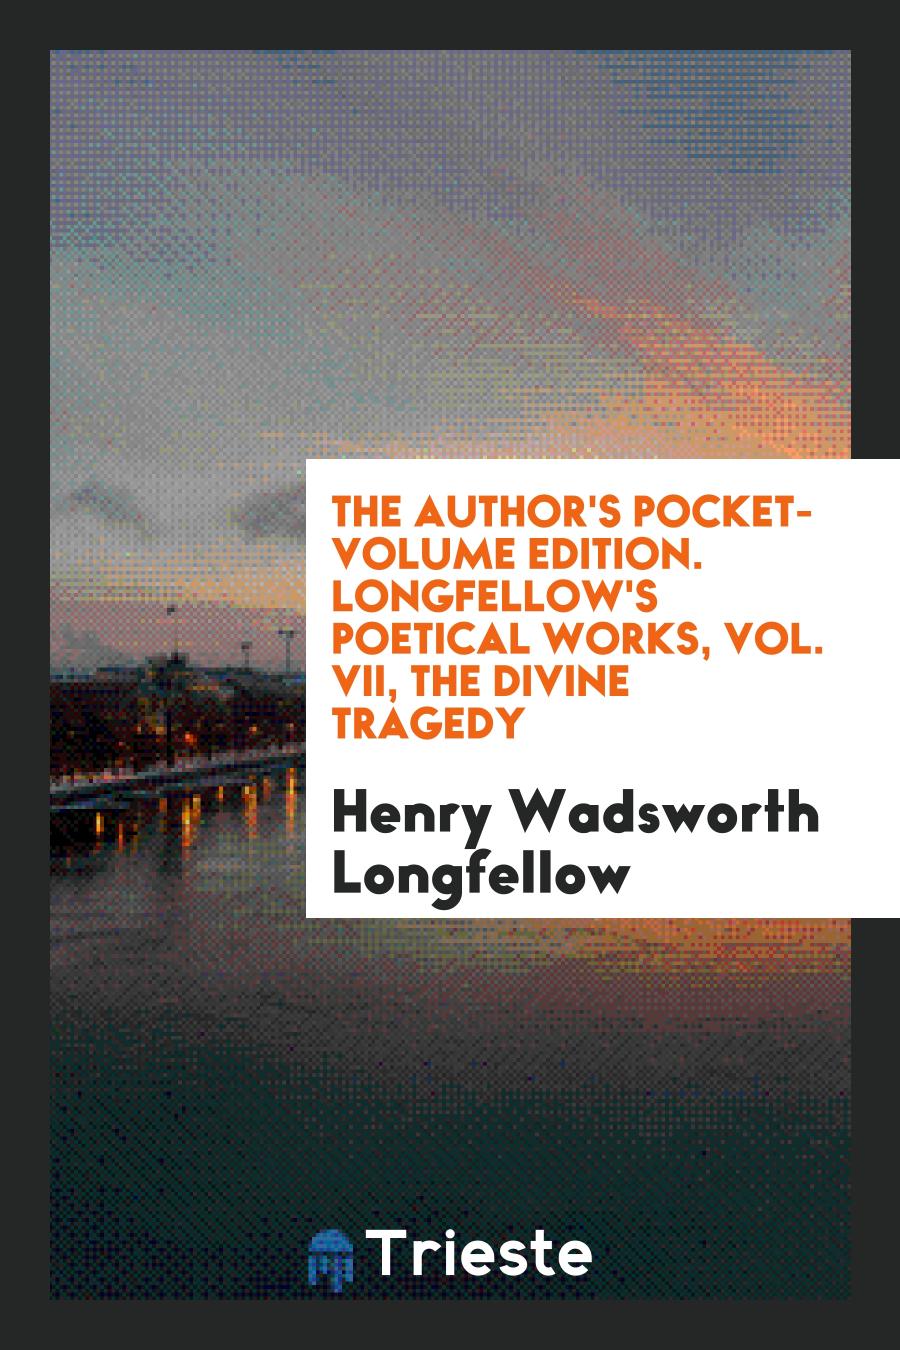 Henry Wadsworth Longfellow - The author's pocket-volume edition. Longfellow's poetical works, Vol. VII, The divine tragedy